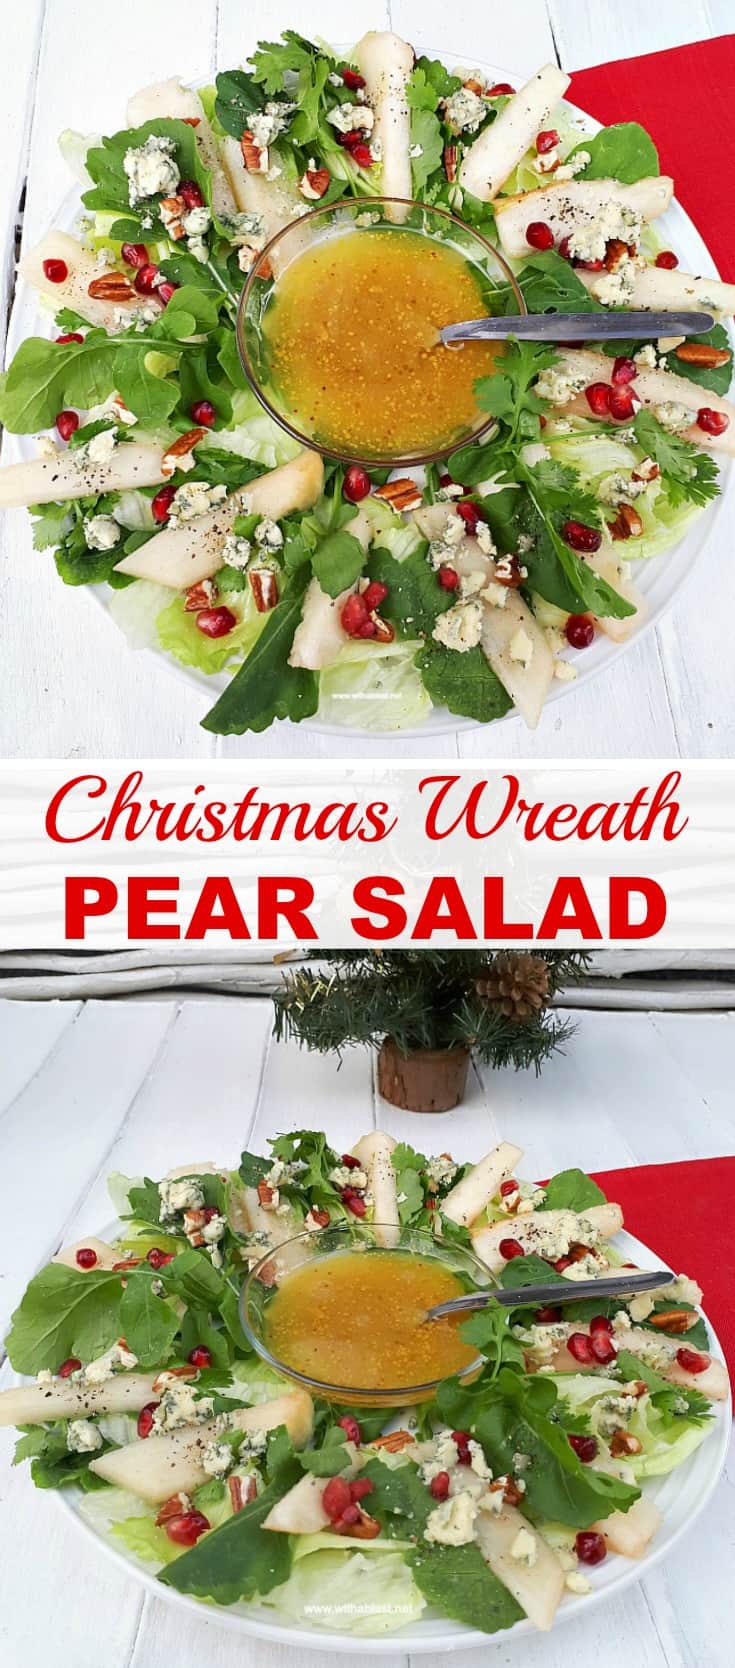 Christmas Wreath Pear Salad is a refreshing salad addition to your Christmas menu, with pears, nuts, pomegranates and more - Prepping to serving within minutes